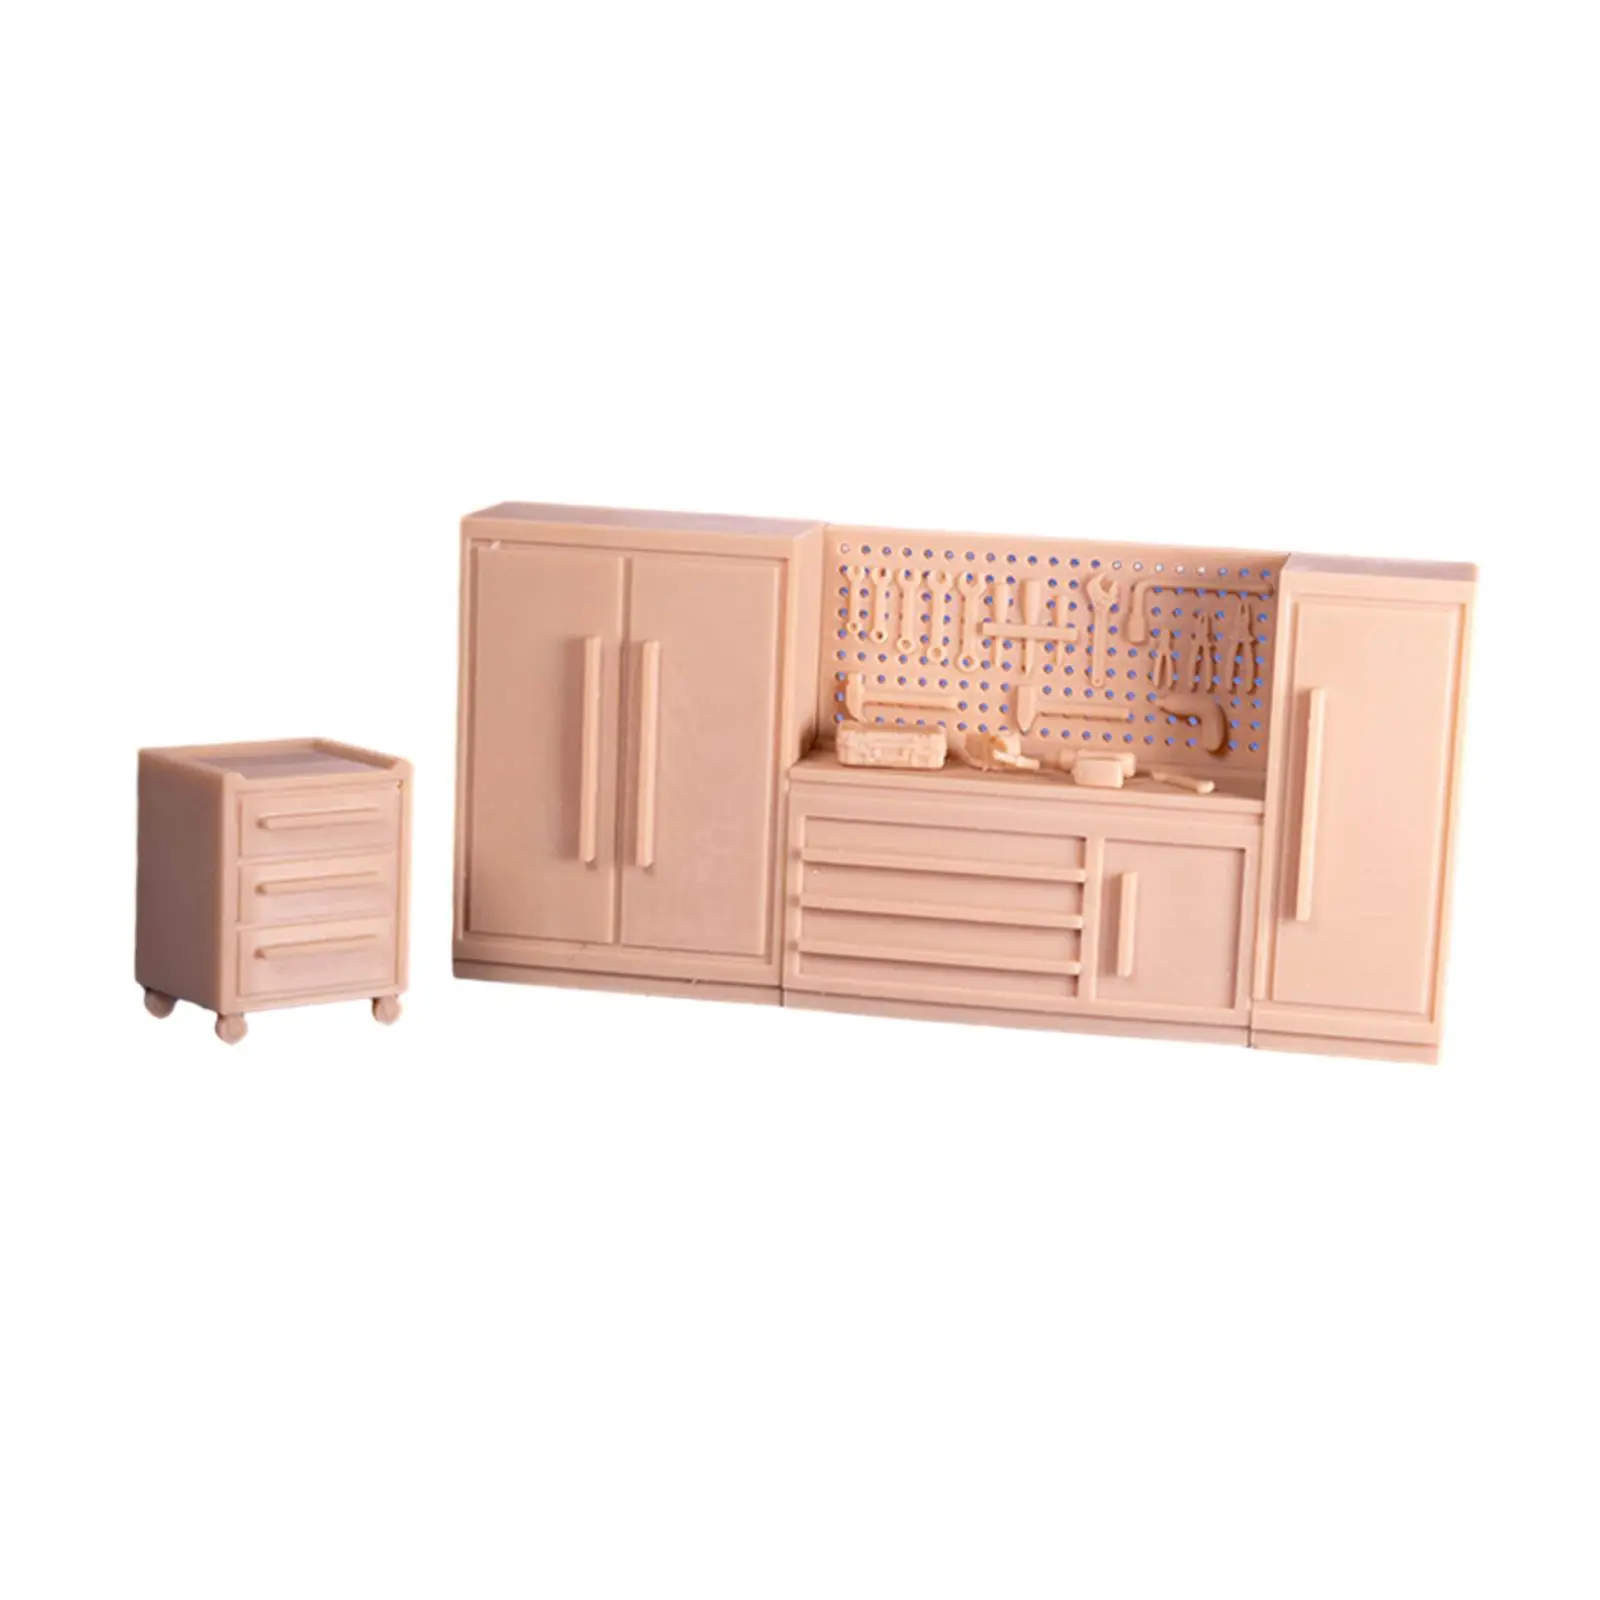 1/64 Cabinet Auto Repair Tool for Diorama Scenery Garage Layout Collections